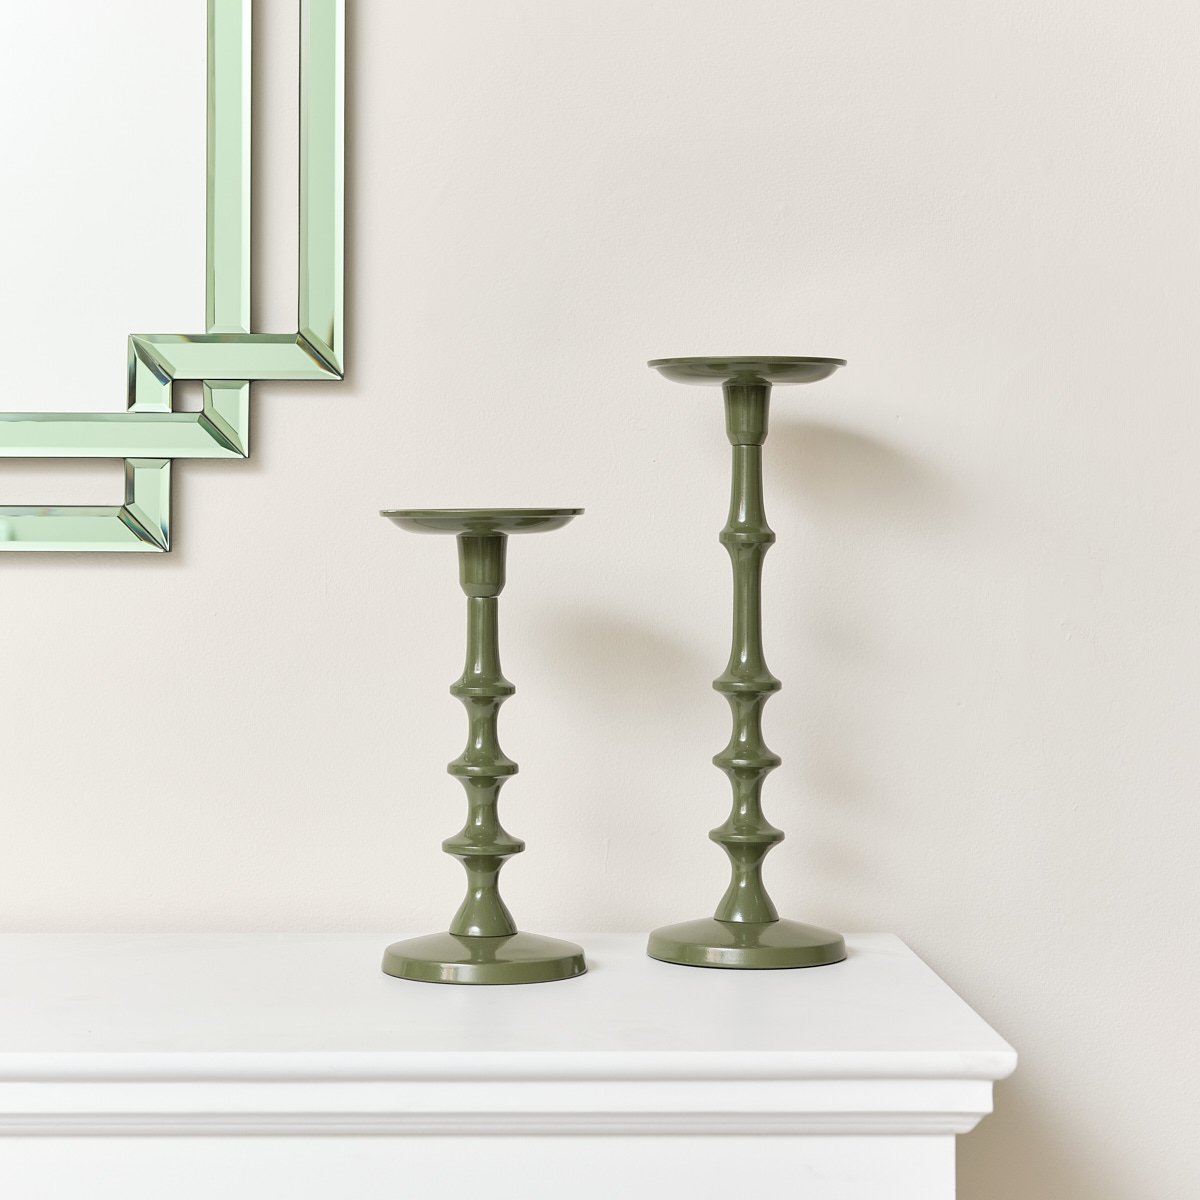 Set of 2 Green Candle Holders